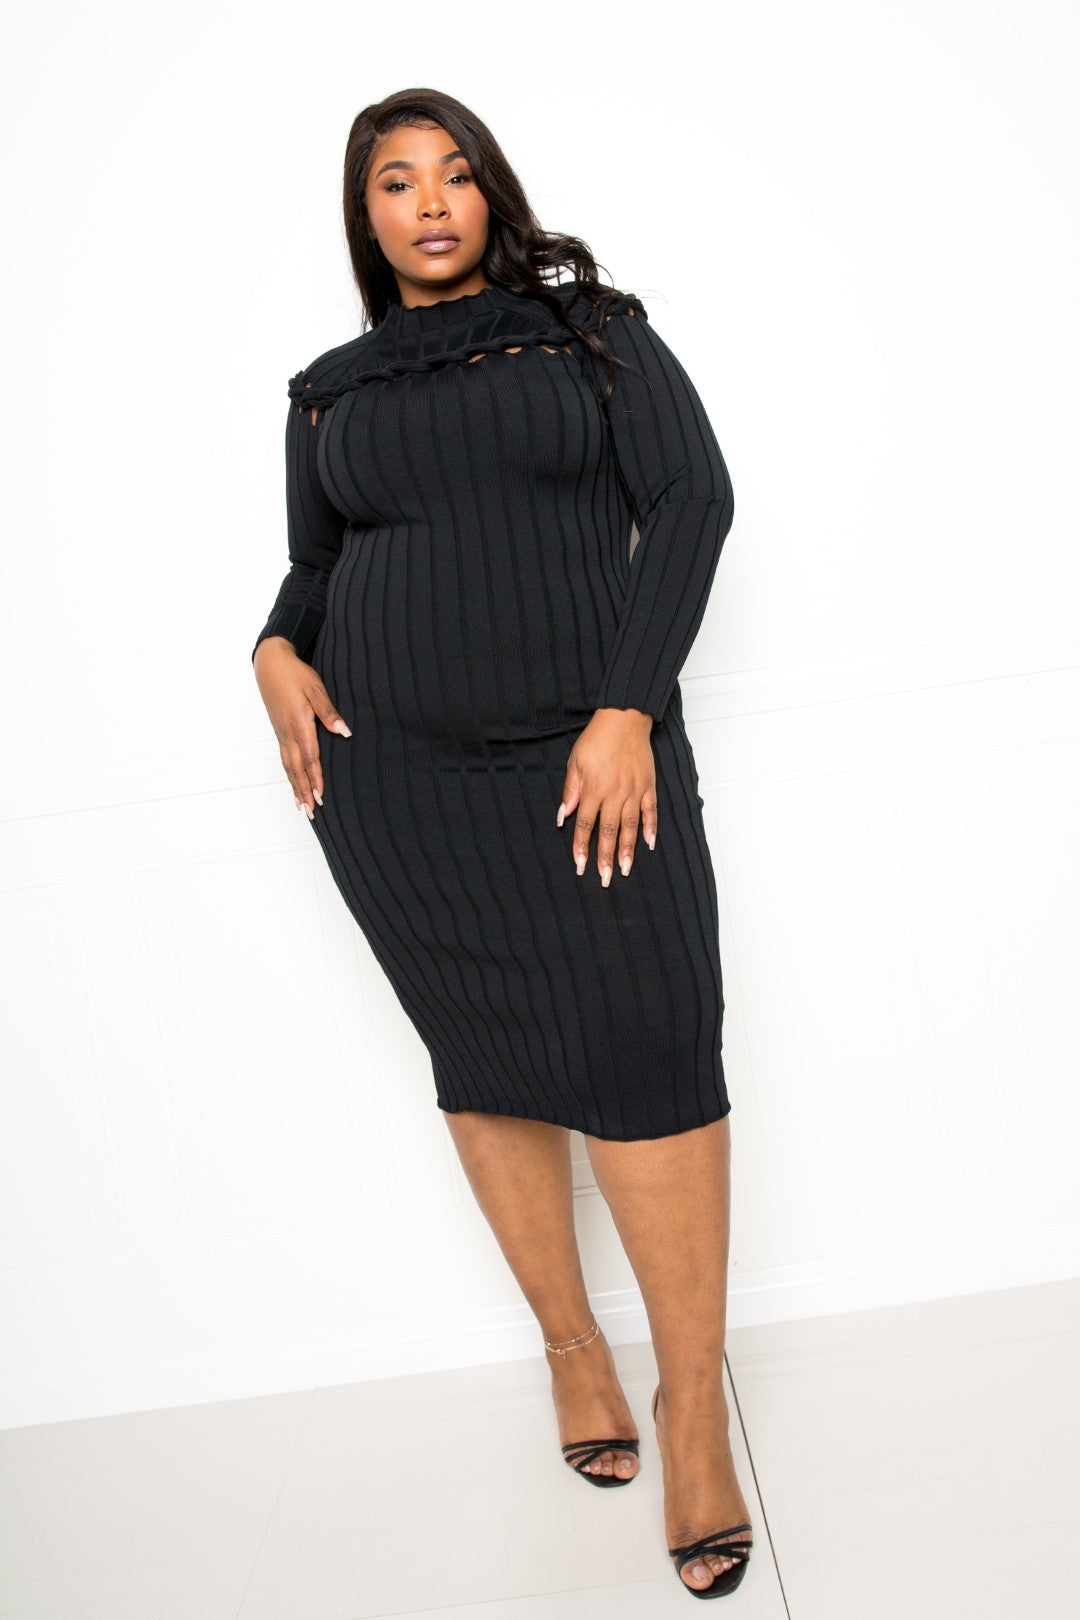 Plus Size Bodycon Sweater Dress With Knot Detail - Tigbuls Variety Fashion